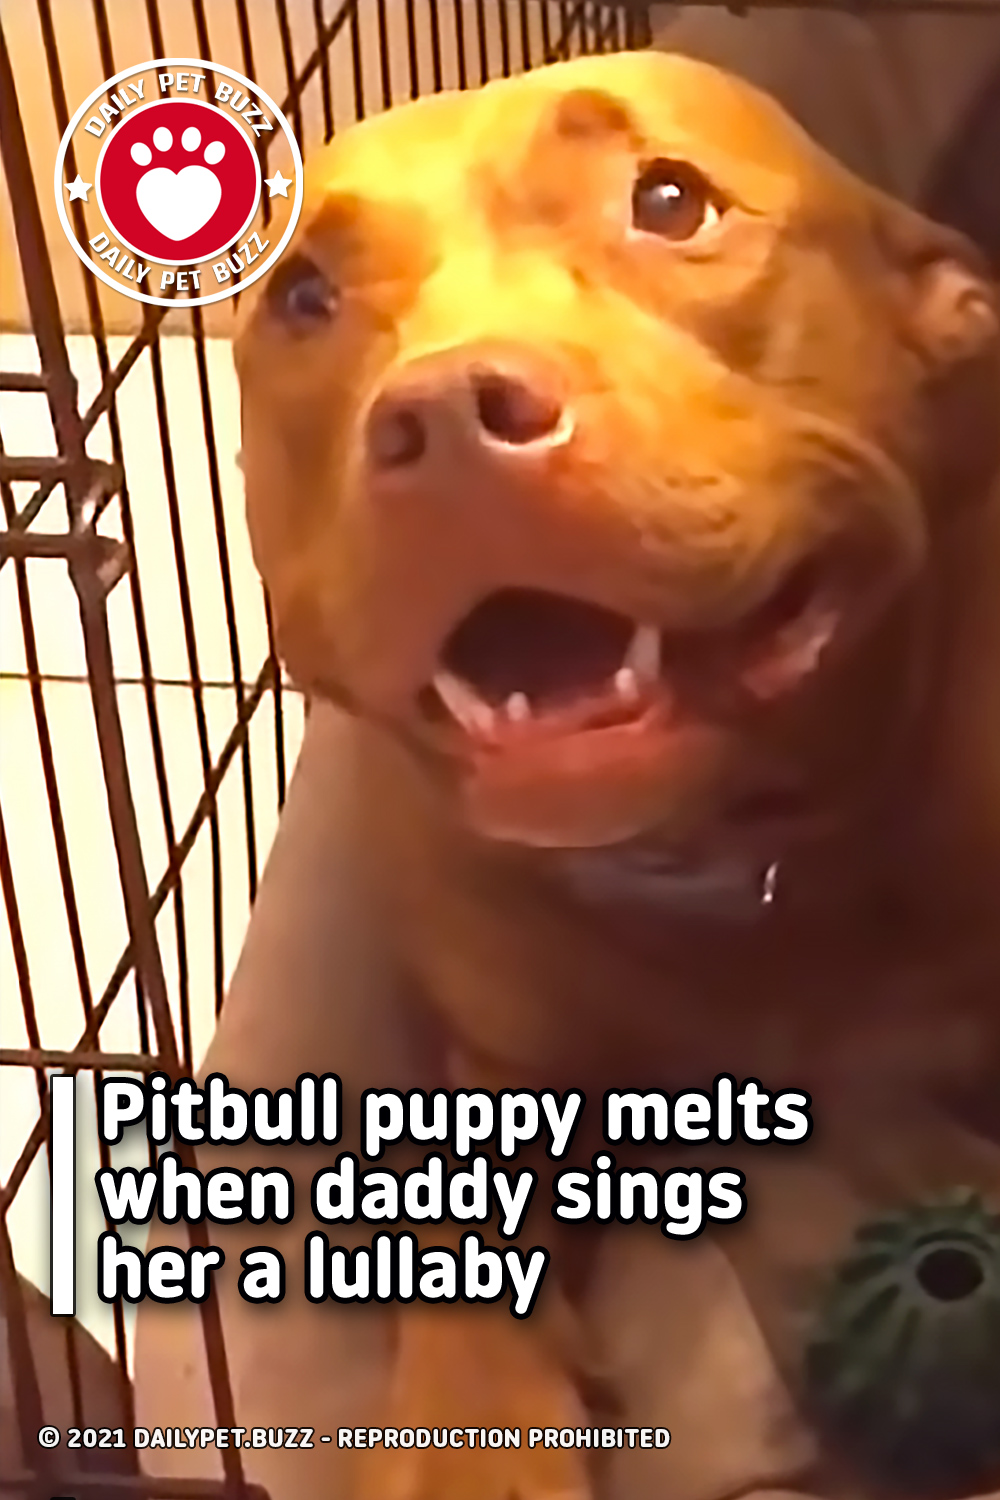 Pitbull puppy melts when daddy sings her a lullaby